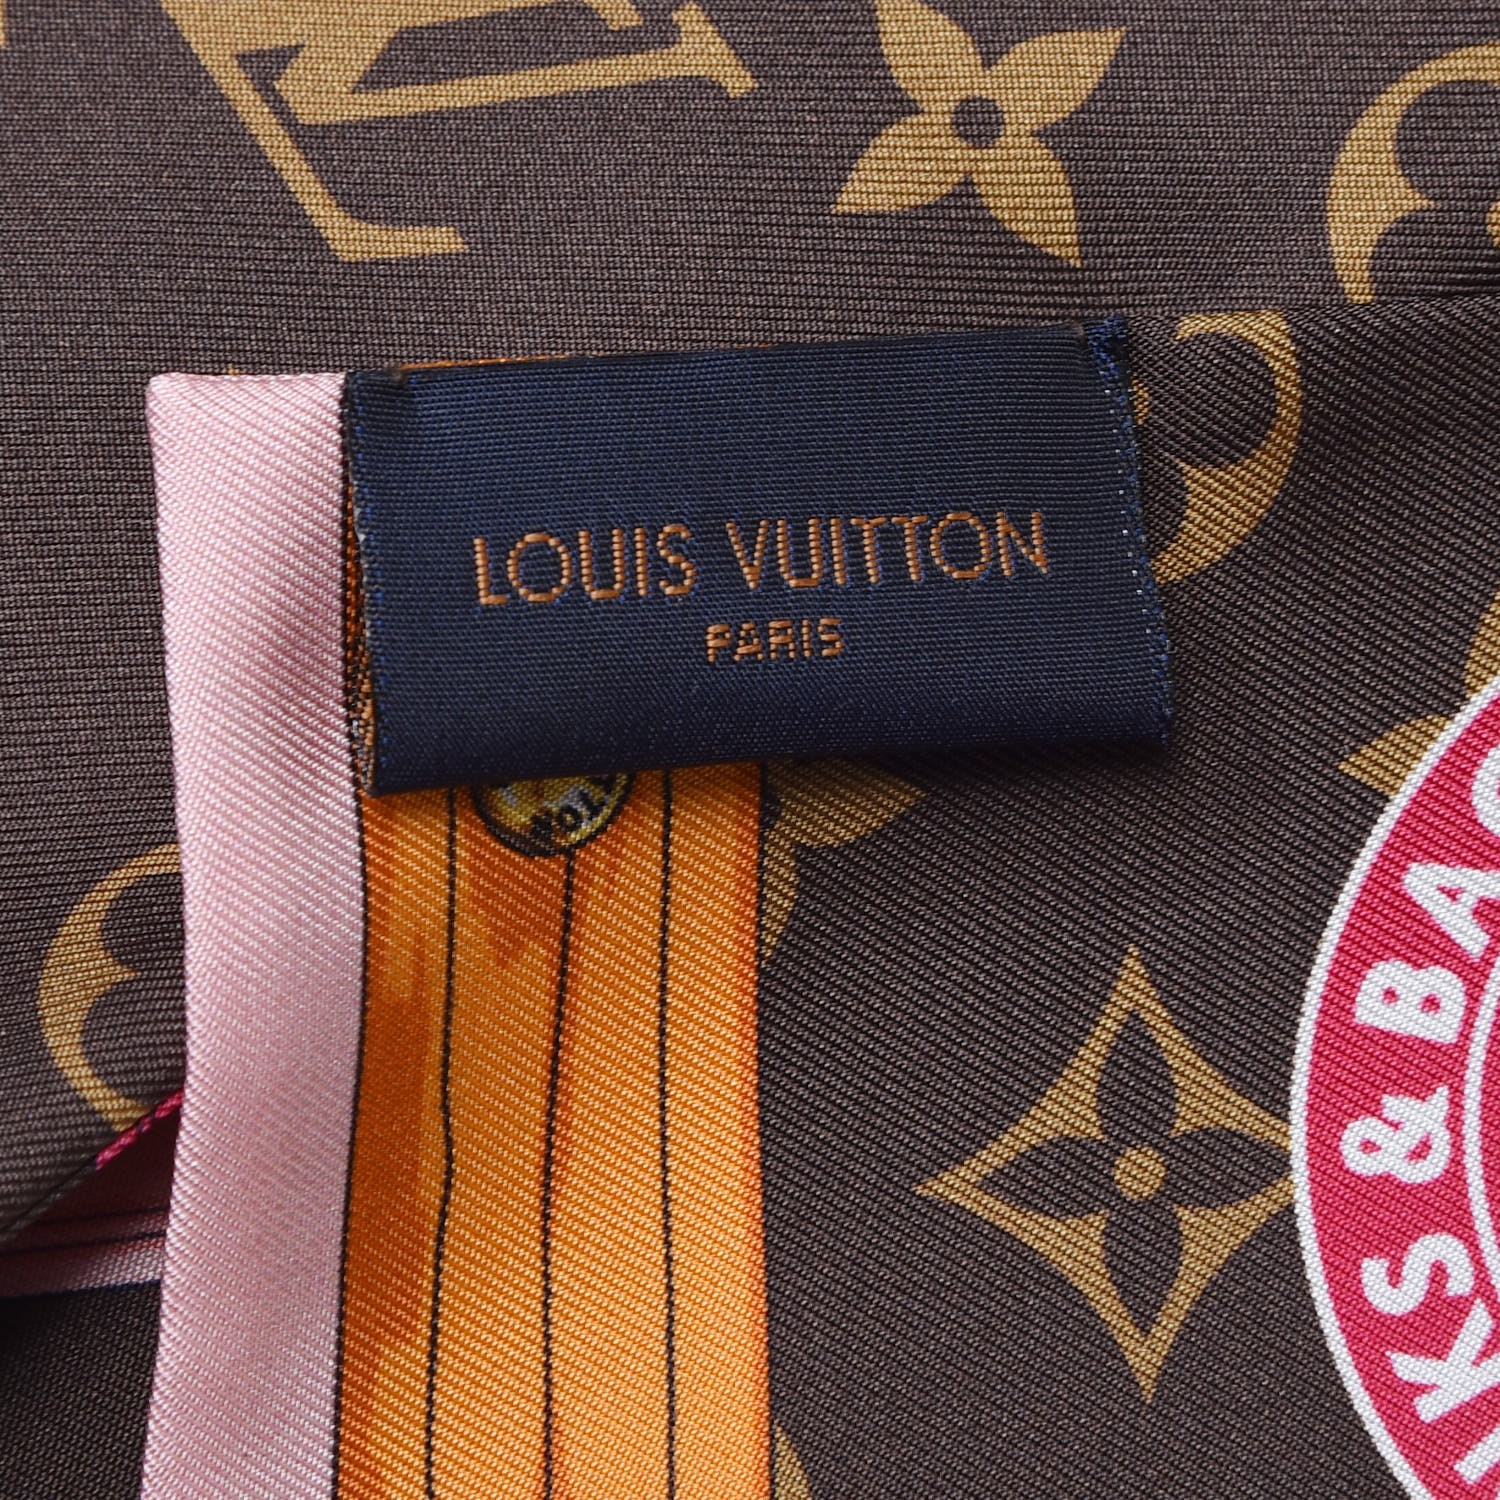 How To Style The Louis Vuitton Bandeau For Summer